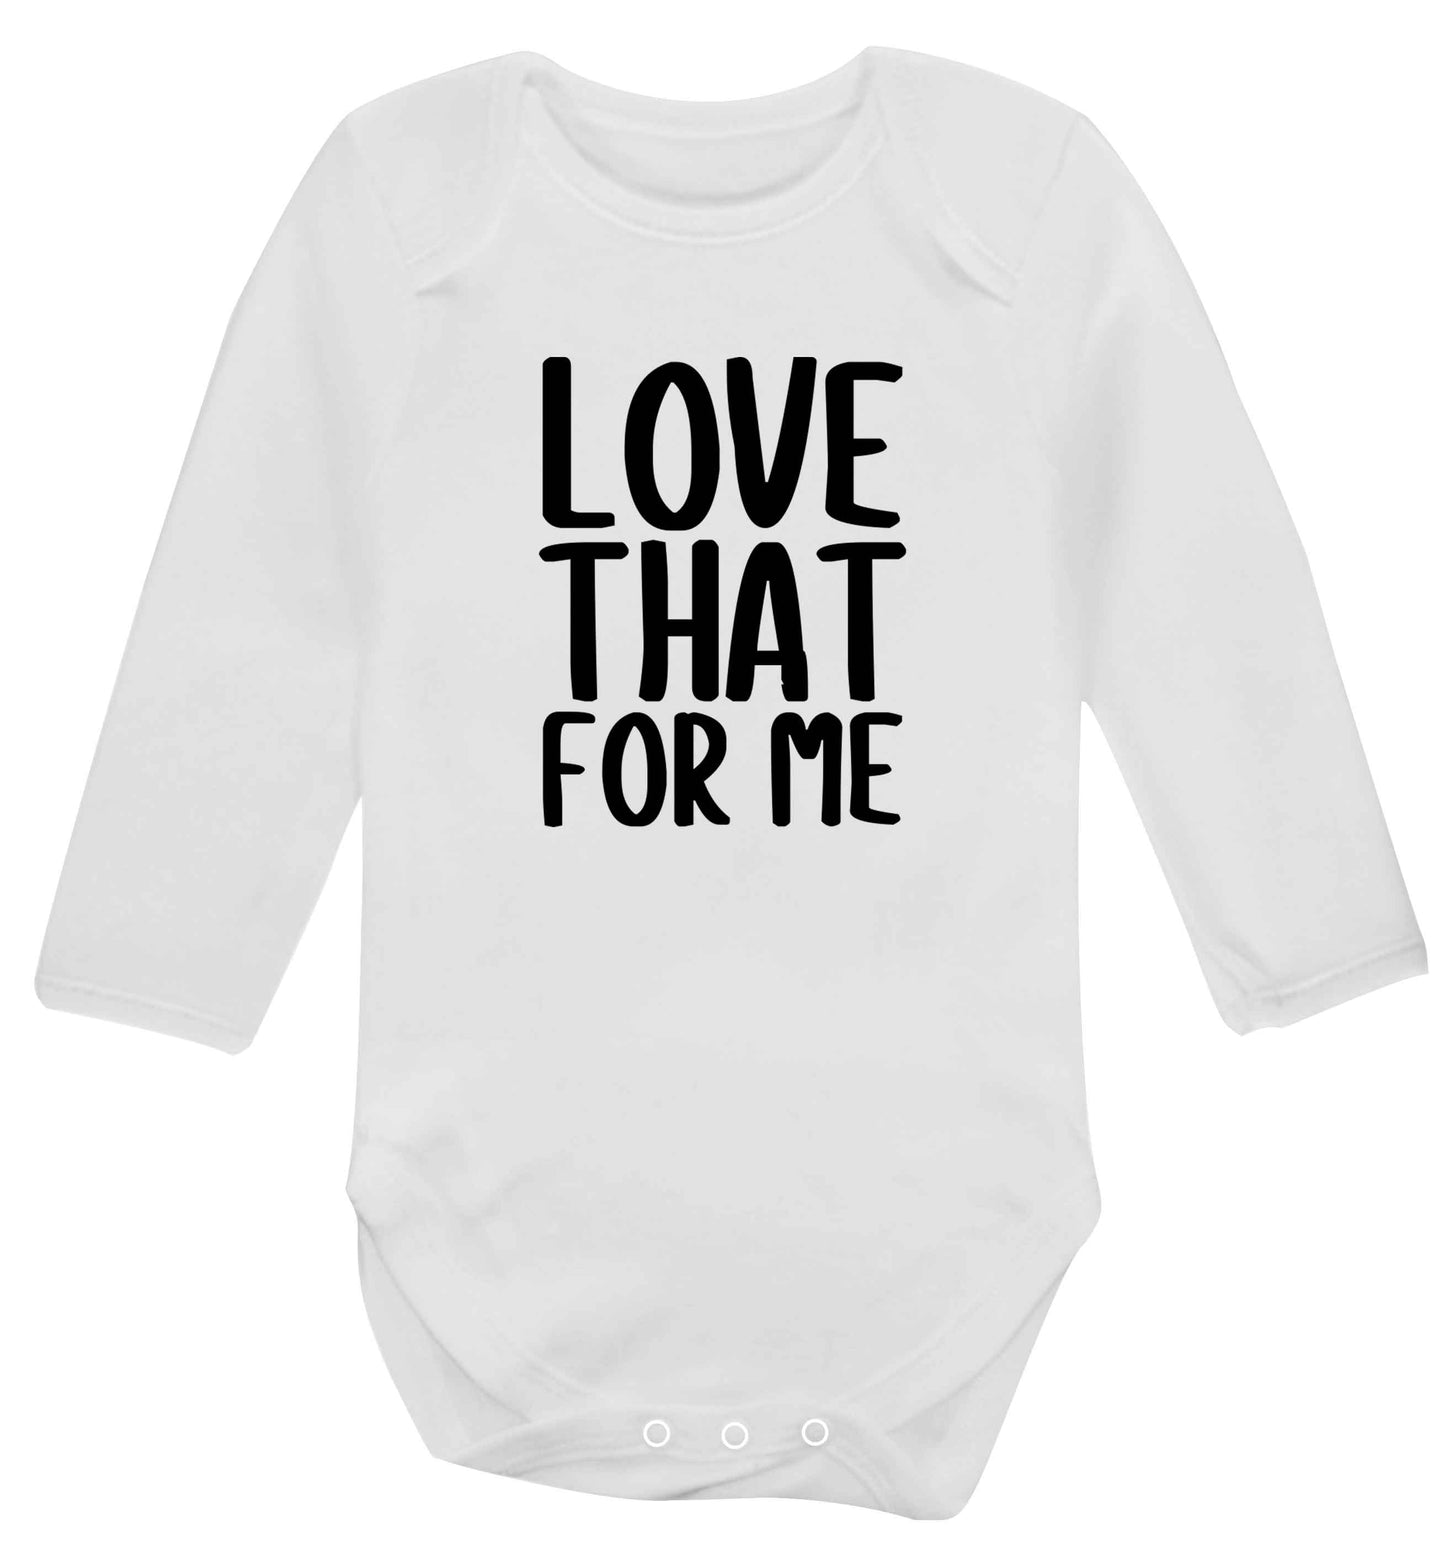 We love this for YOU! Who else loves saying this?!  baby vest long sleeved white 6-12 months